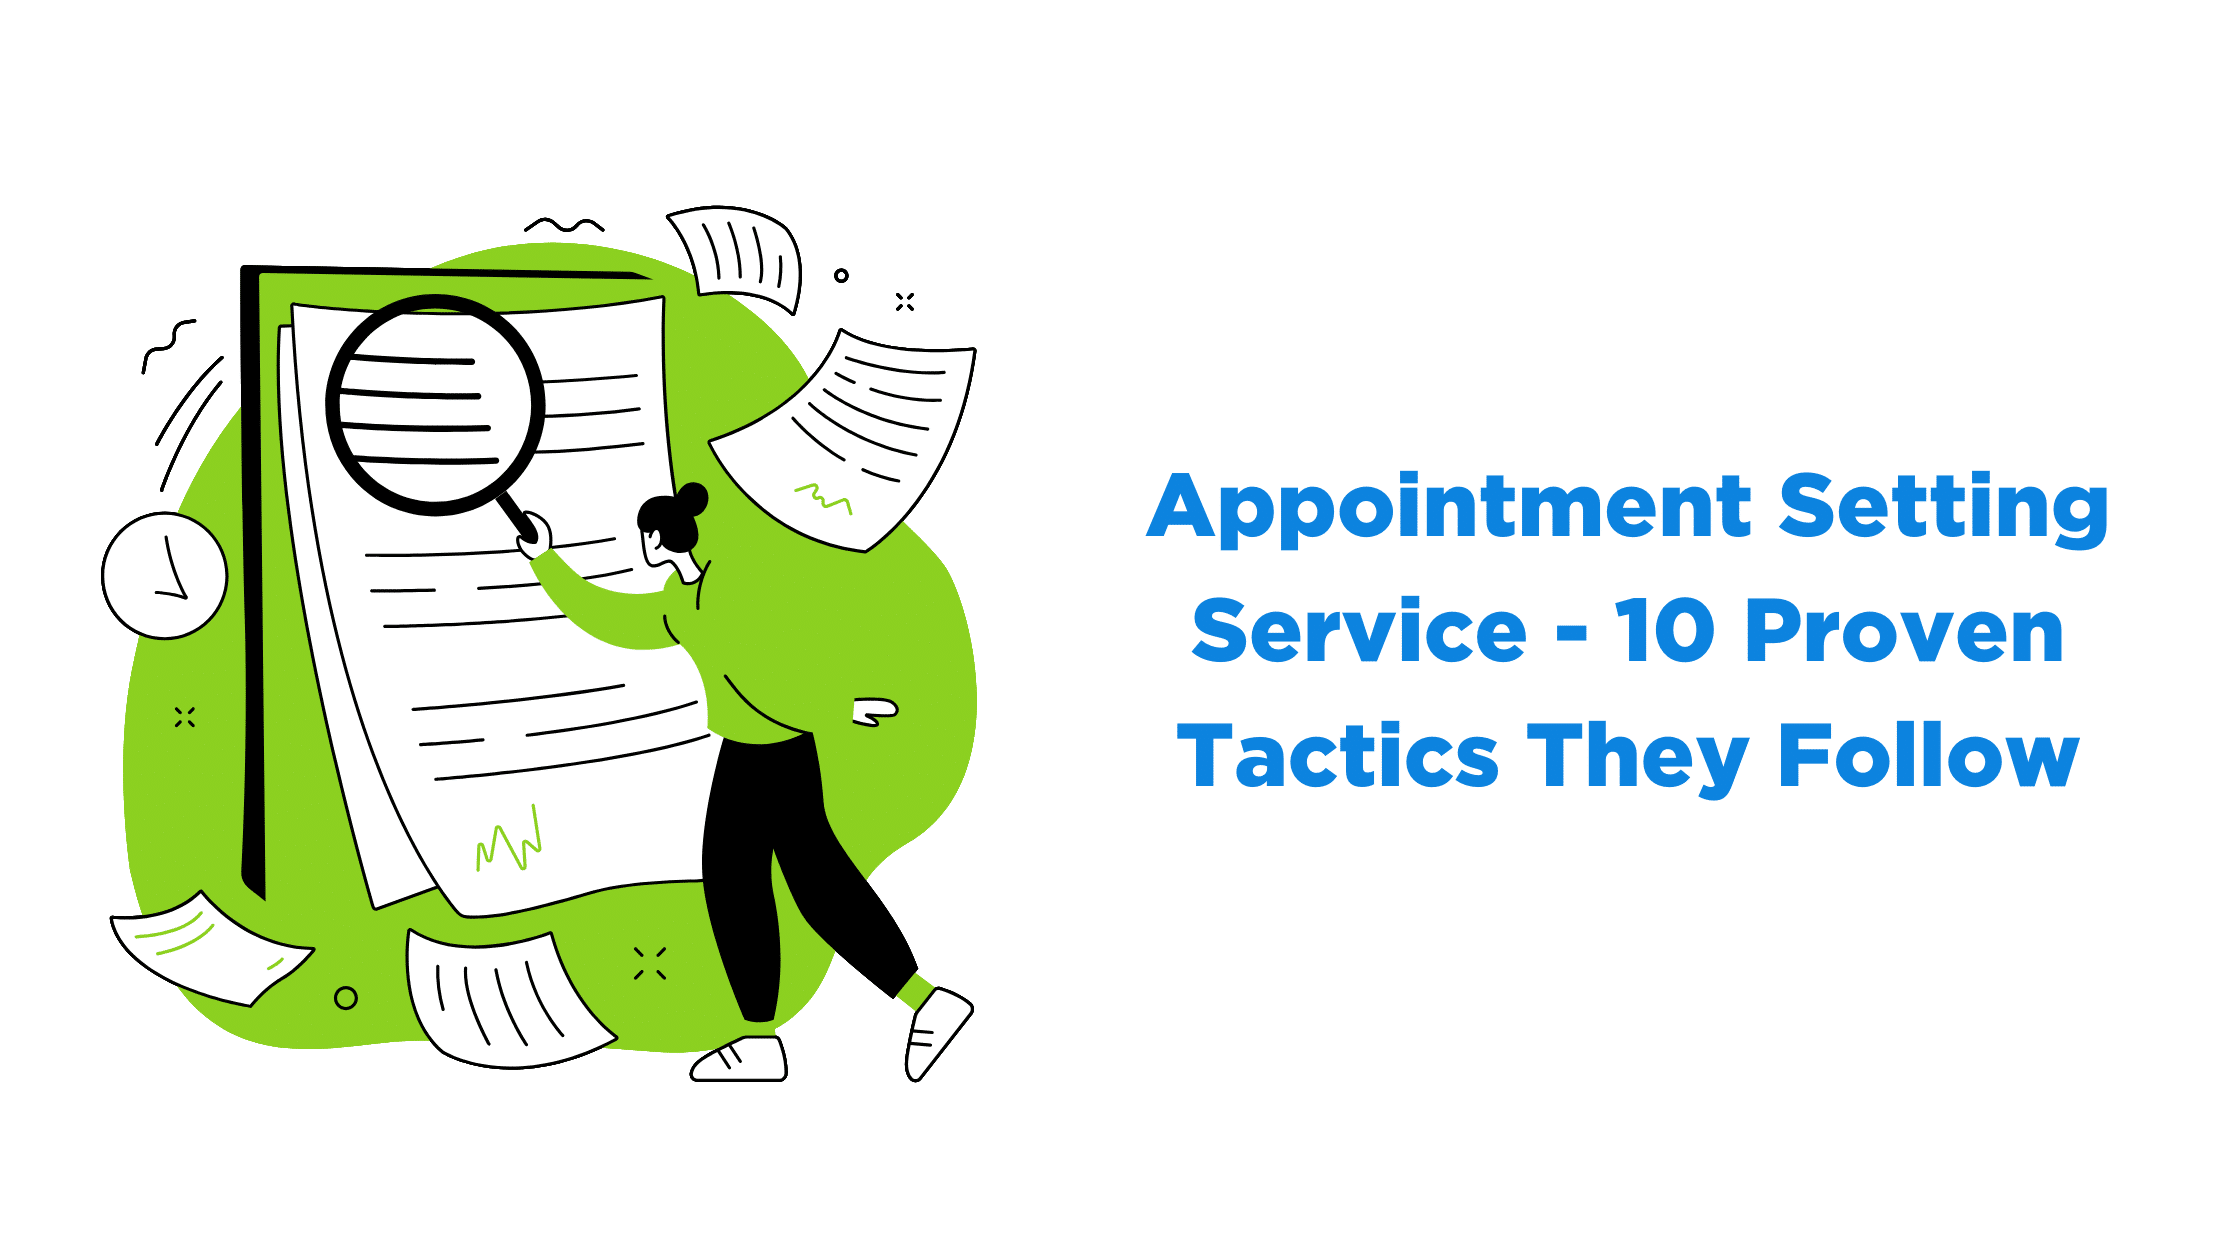 Appointment Setting Service - 10 Proven Tactics They Follow